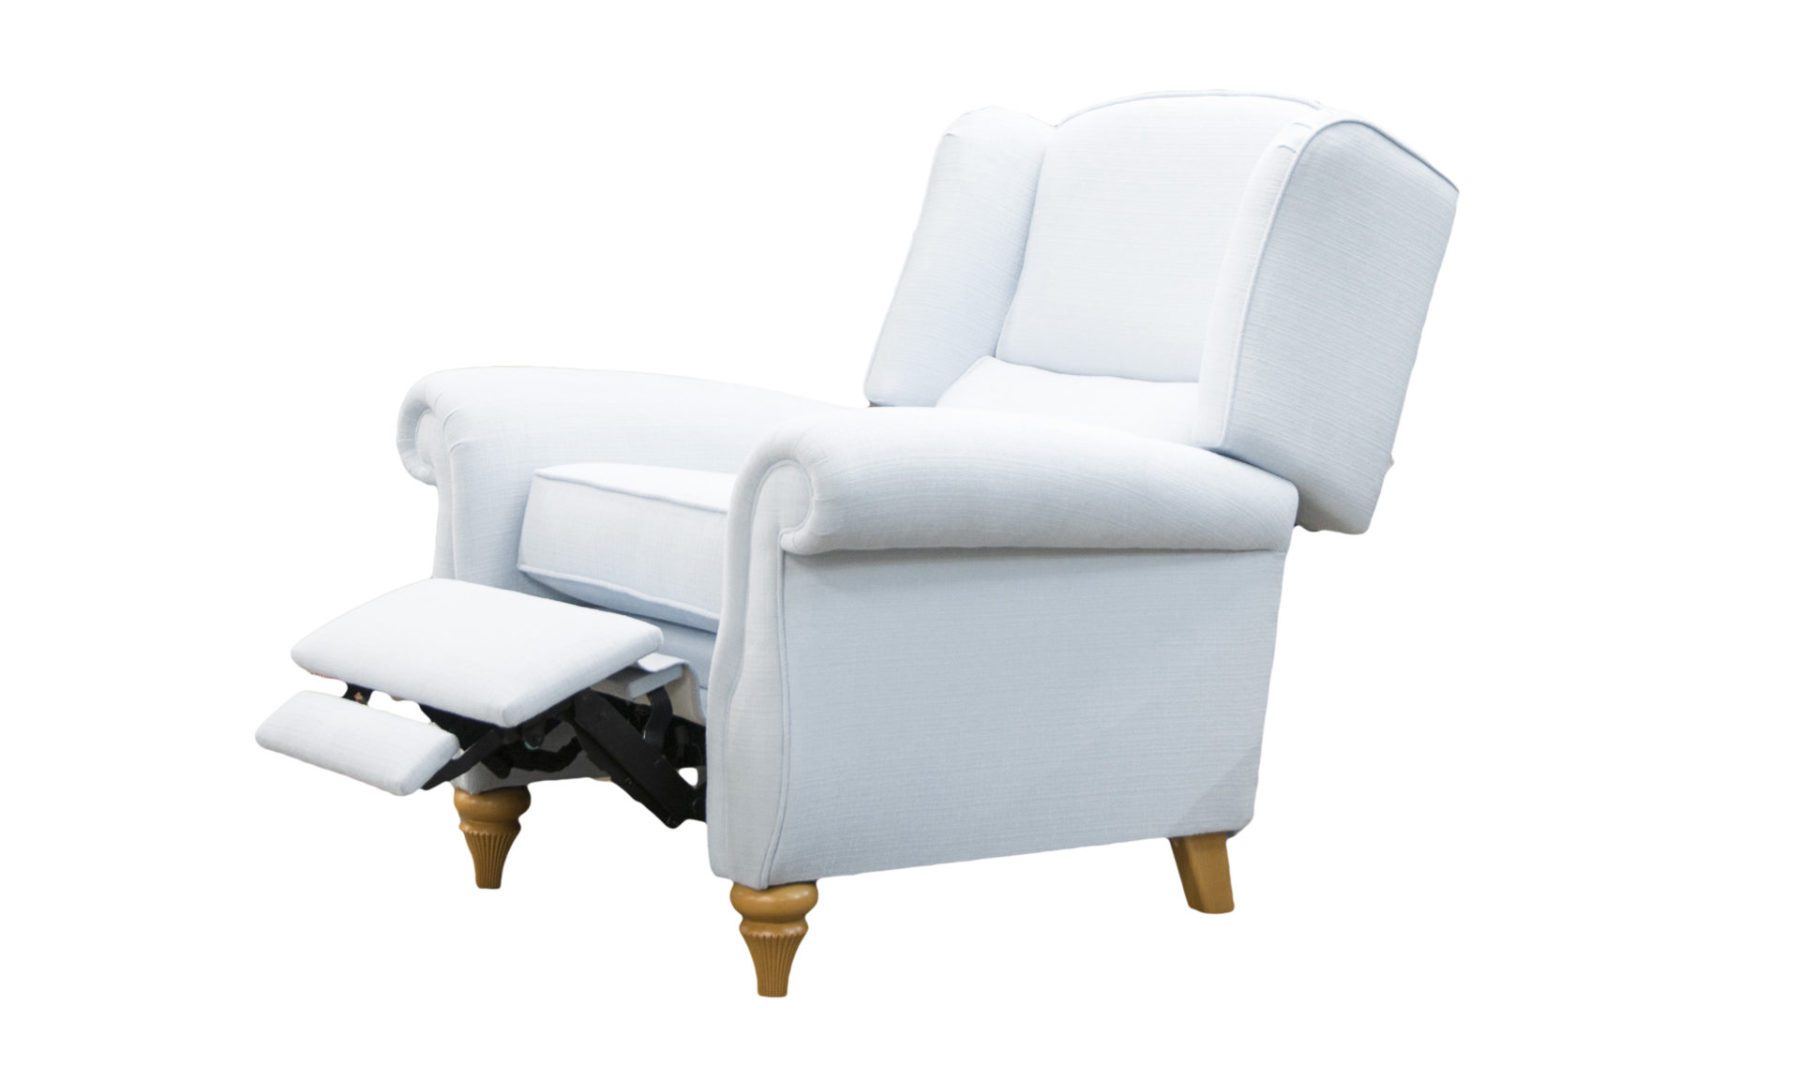 Greville Recliner Chair in JBrown Hendrix 605 Cornflower Plain, Gold Collection of Fabric